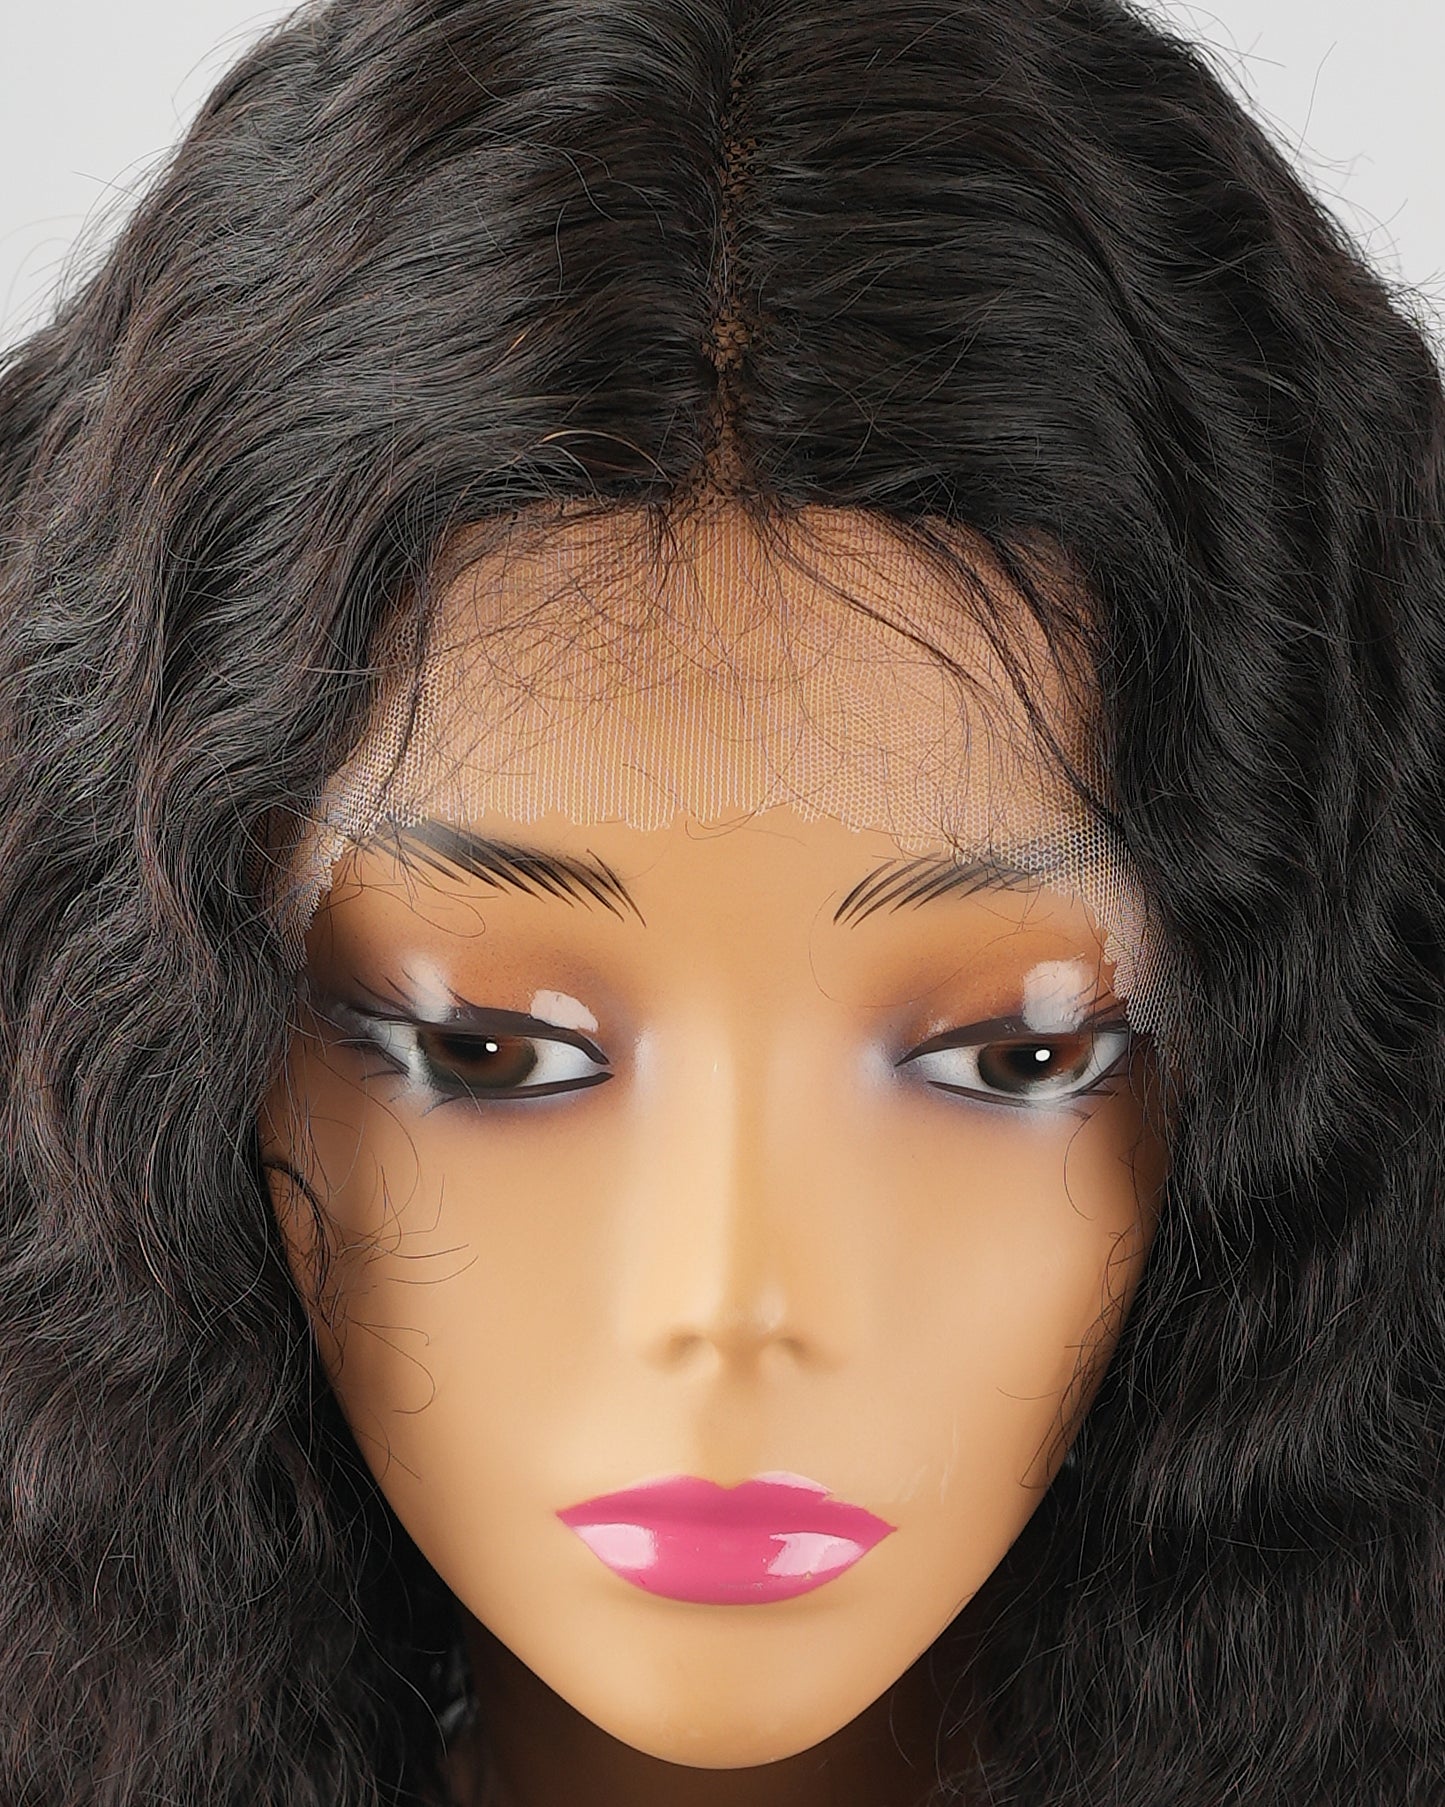 Bobbi Boss® MHLF562 Kizzie Unprocessed Human Hair Middle Part Wig (Color Natural)